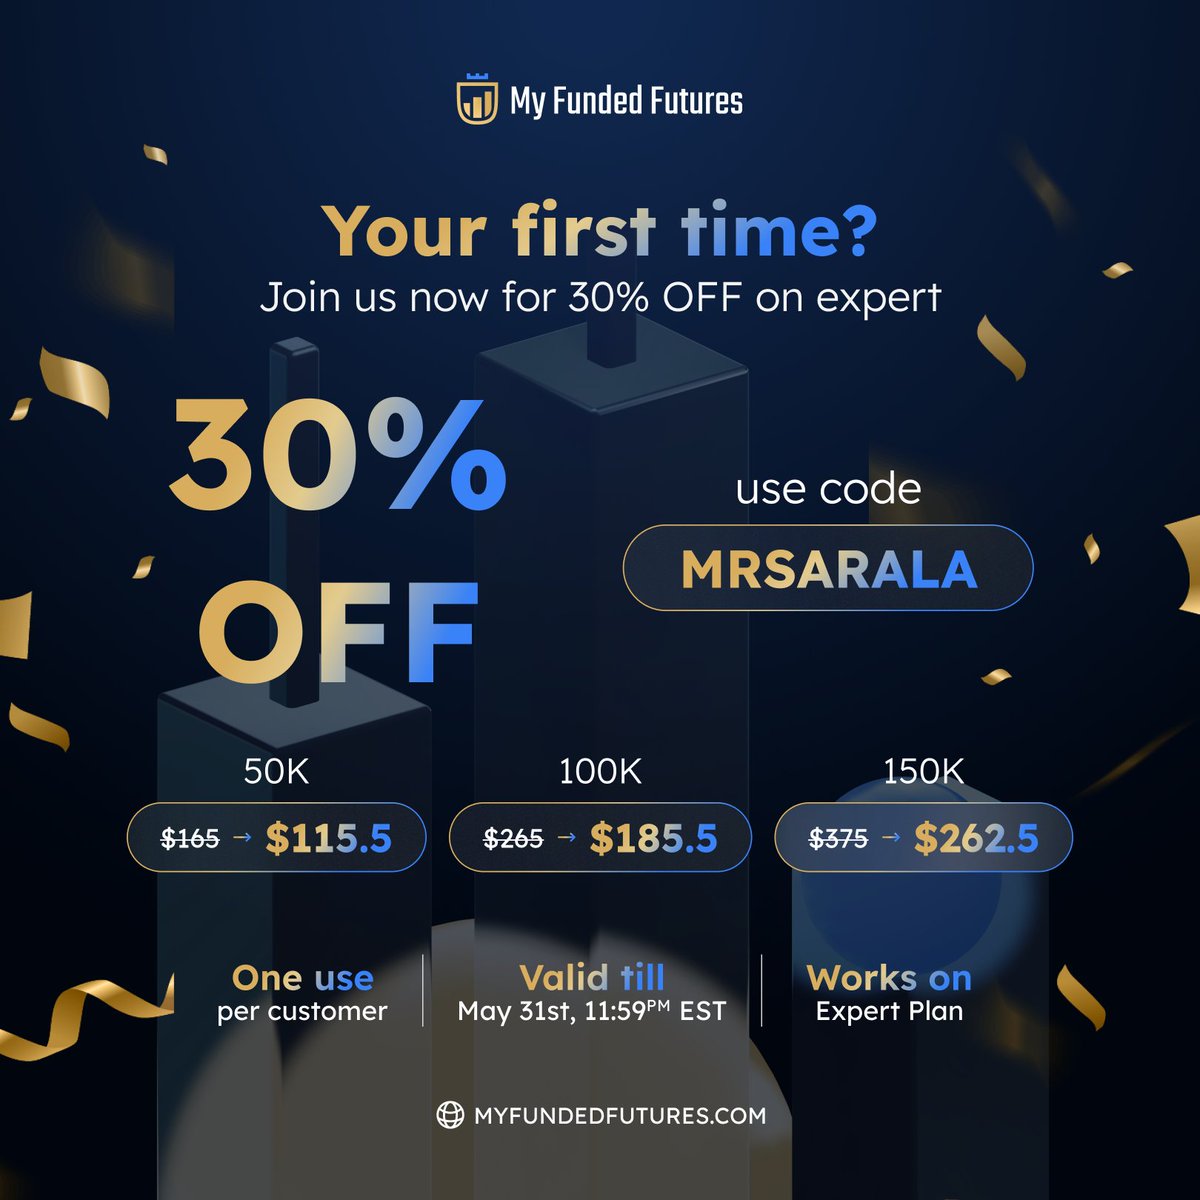 🌟 If you've been waiting to give MFFU a shot, now's your chance! 🎉 #MayMania brings 30% off all expert plans for NEW customers + NO activation fees ever on expert. The best plan in the industry just got better! 🚀 SIGN UP NOW: Use code 'MRSARALA' myfundedfutures.com/?ref=1545